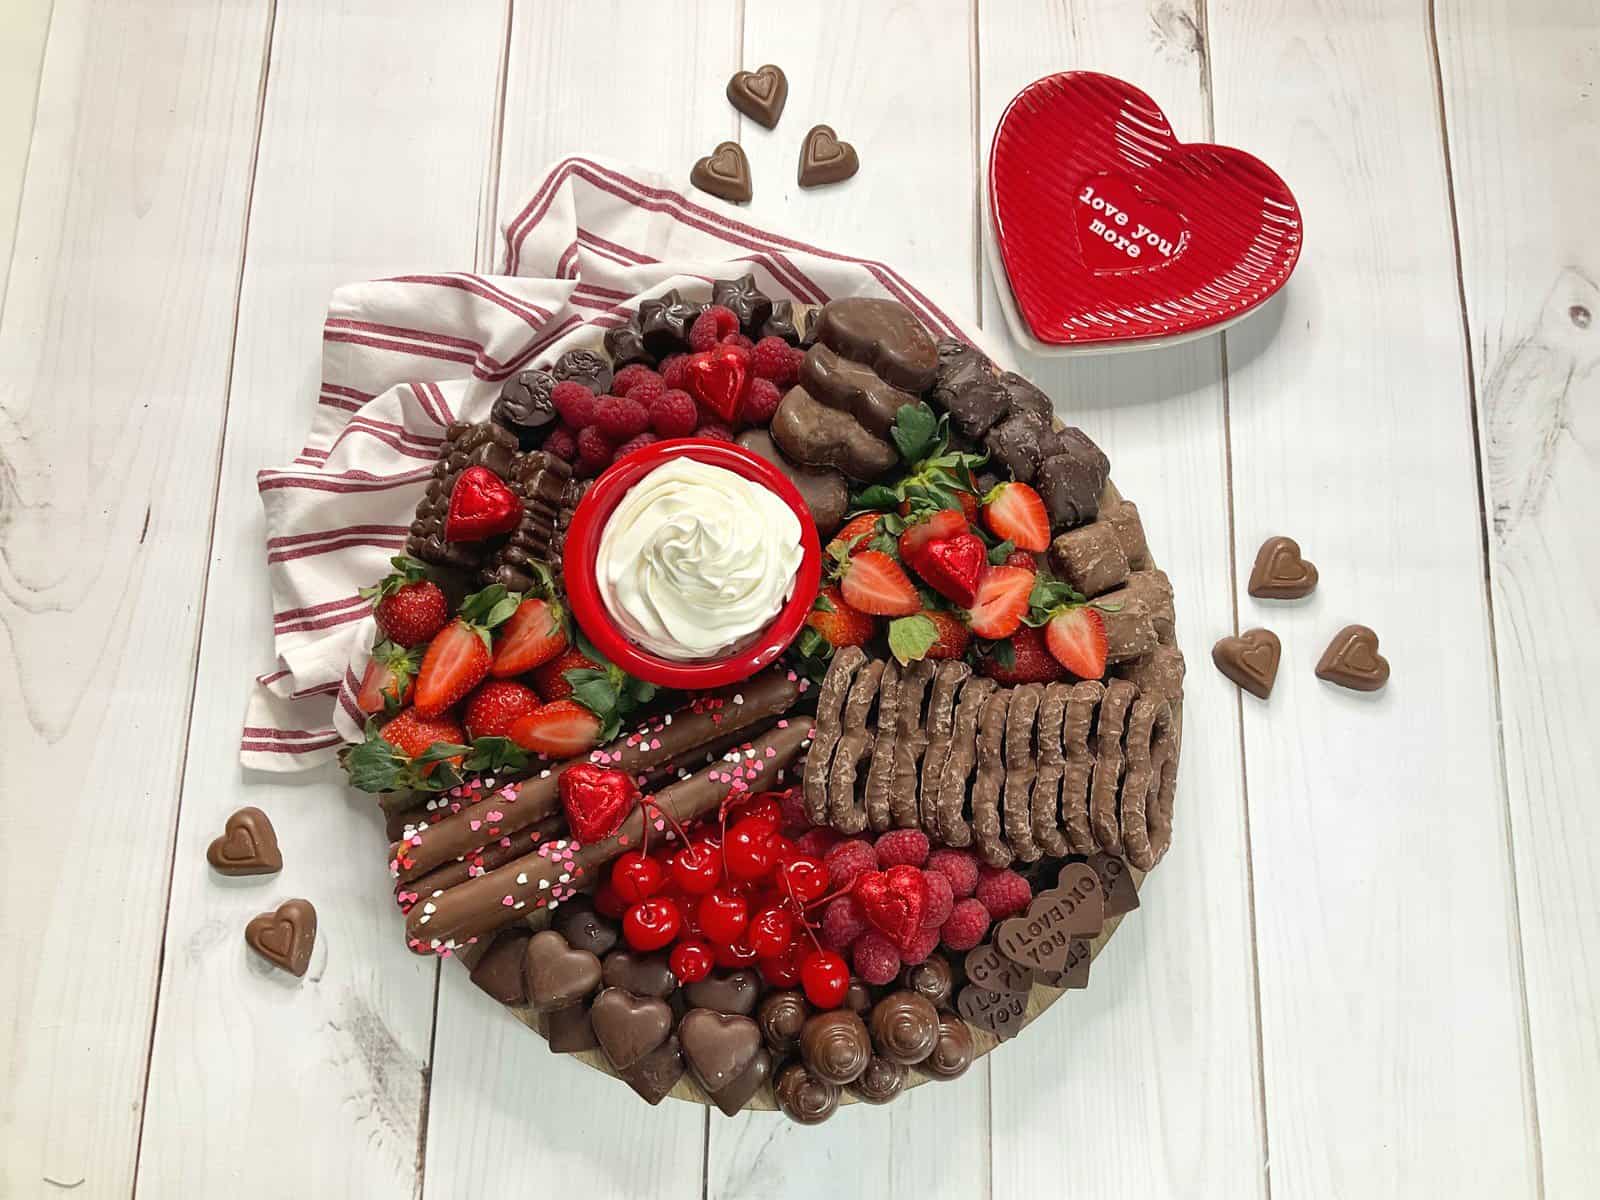 completed chocolate lovers valentines day snack board with cherries, strawberries, raspberries, homemade peanut butter chocolate hearts, chocolate hearts, chocolate covered pretzels, and a bowl of cool whip. 